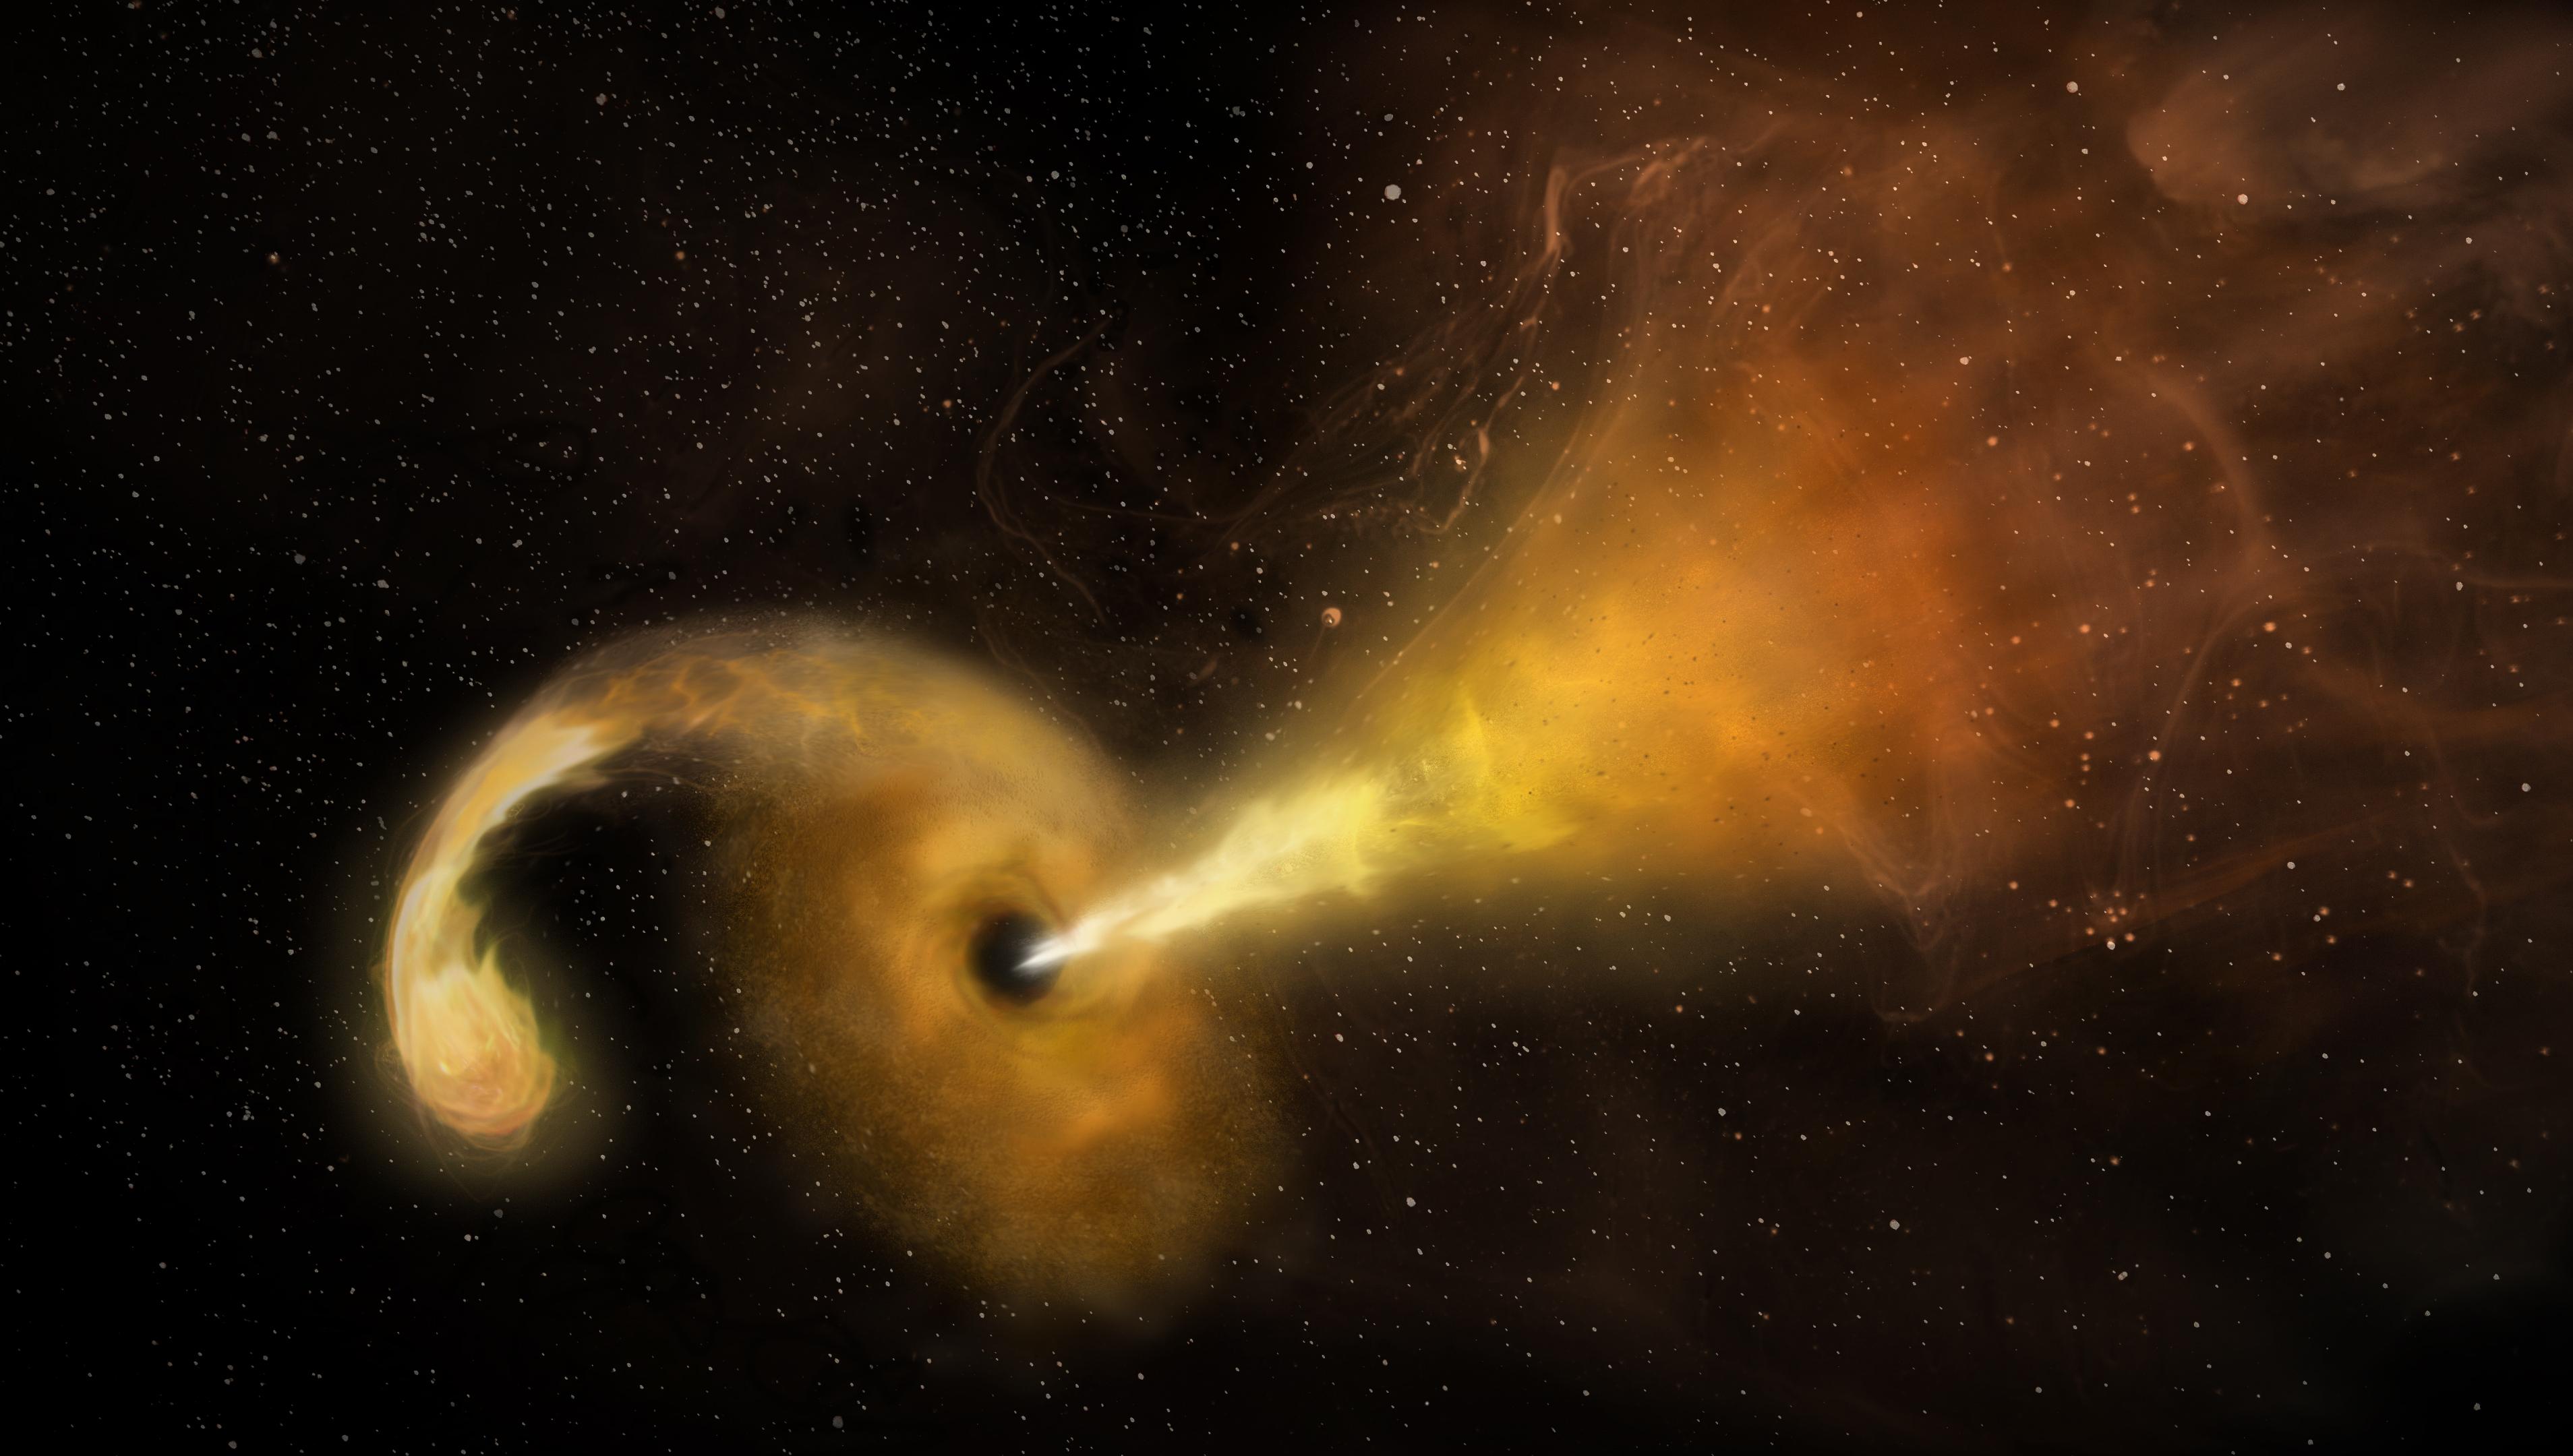 An artist's depiction of a black hole eating a star, also known as a tidal disruption event, and producing a superfast jet.